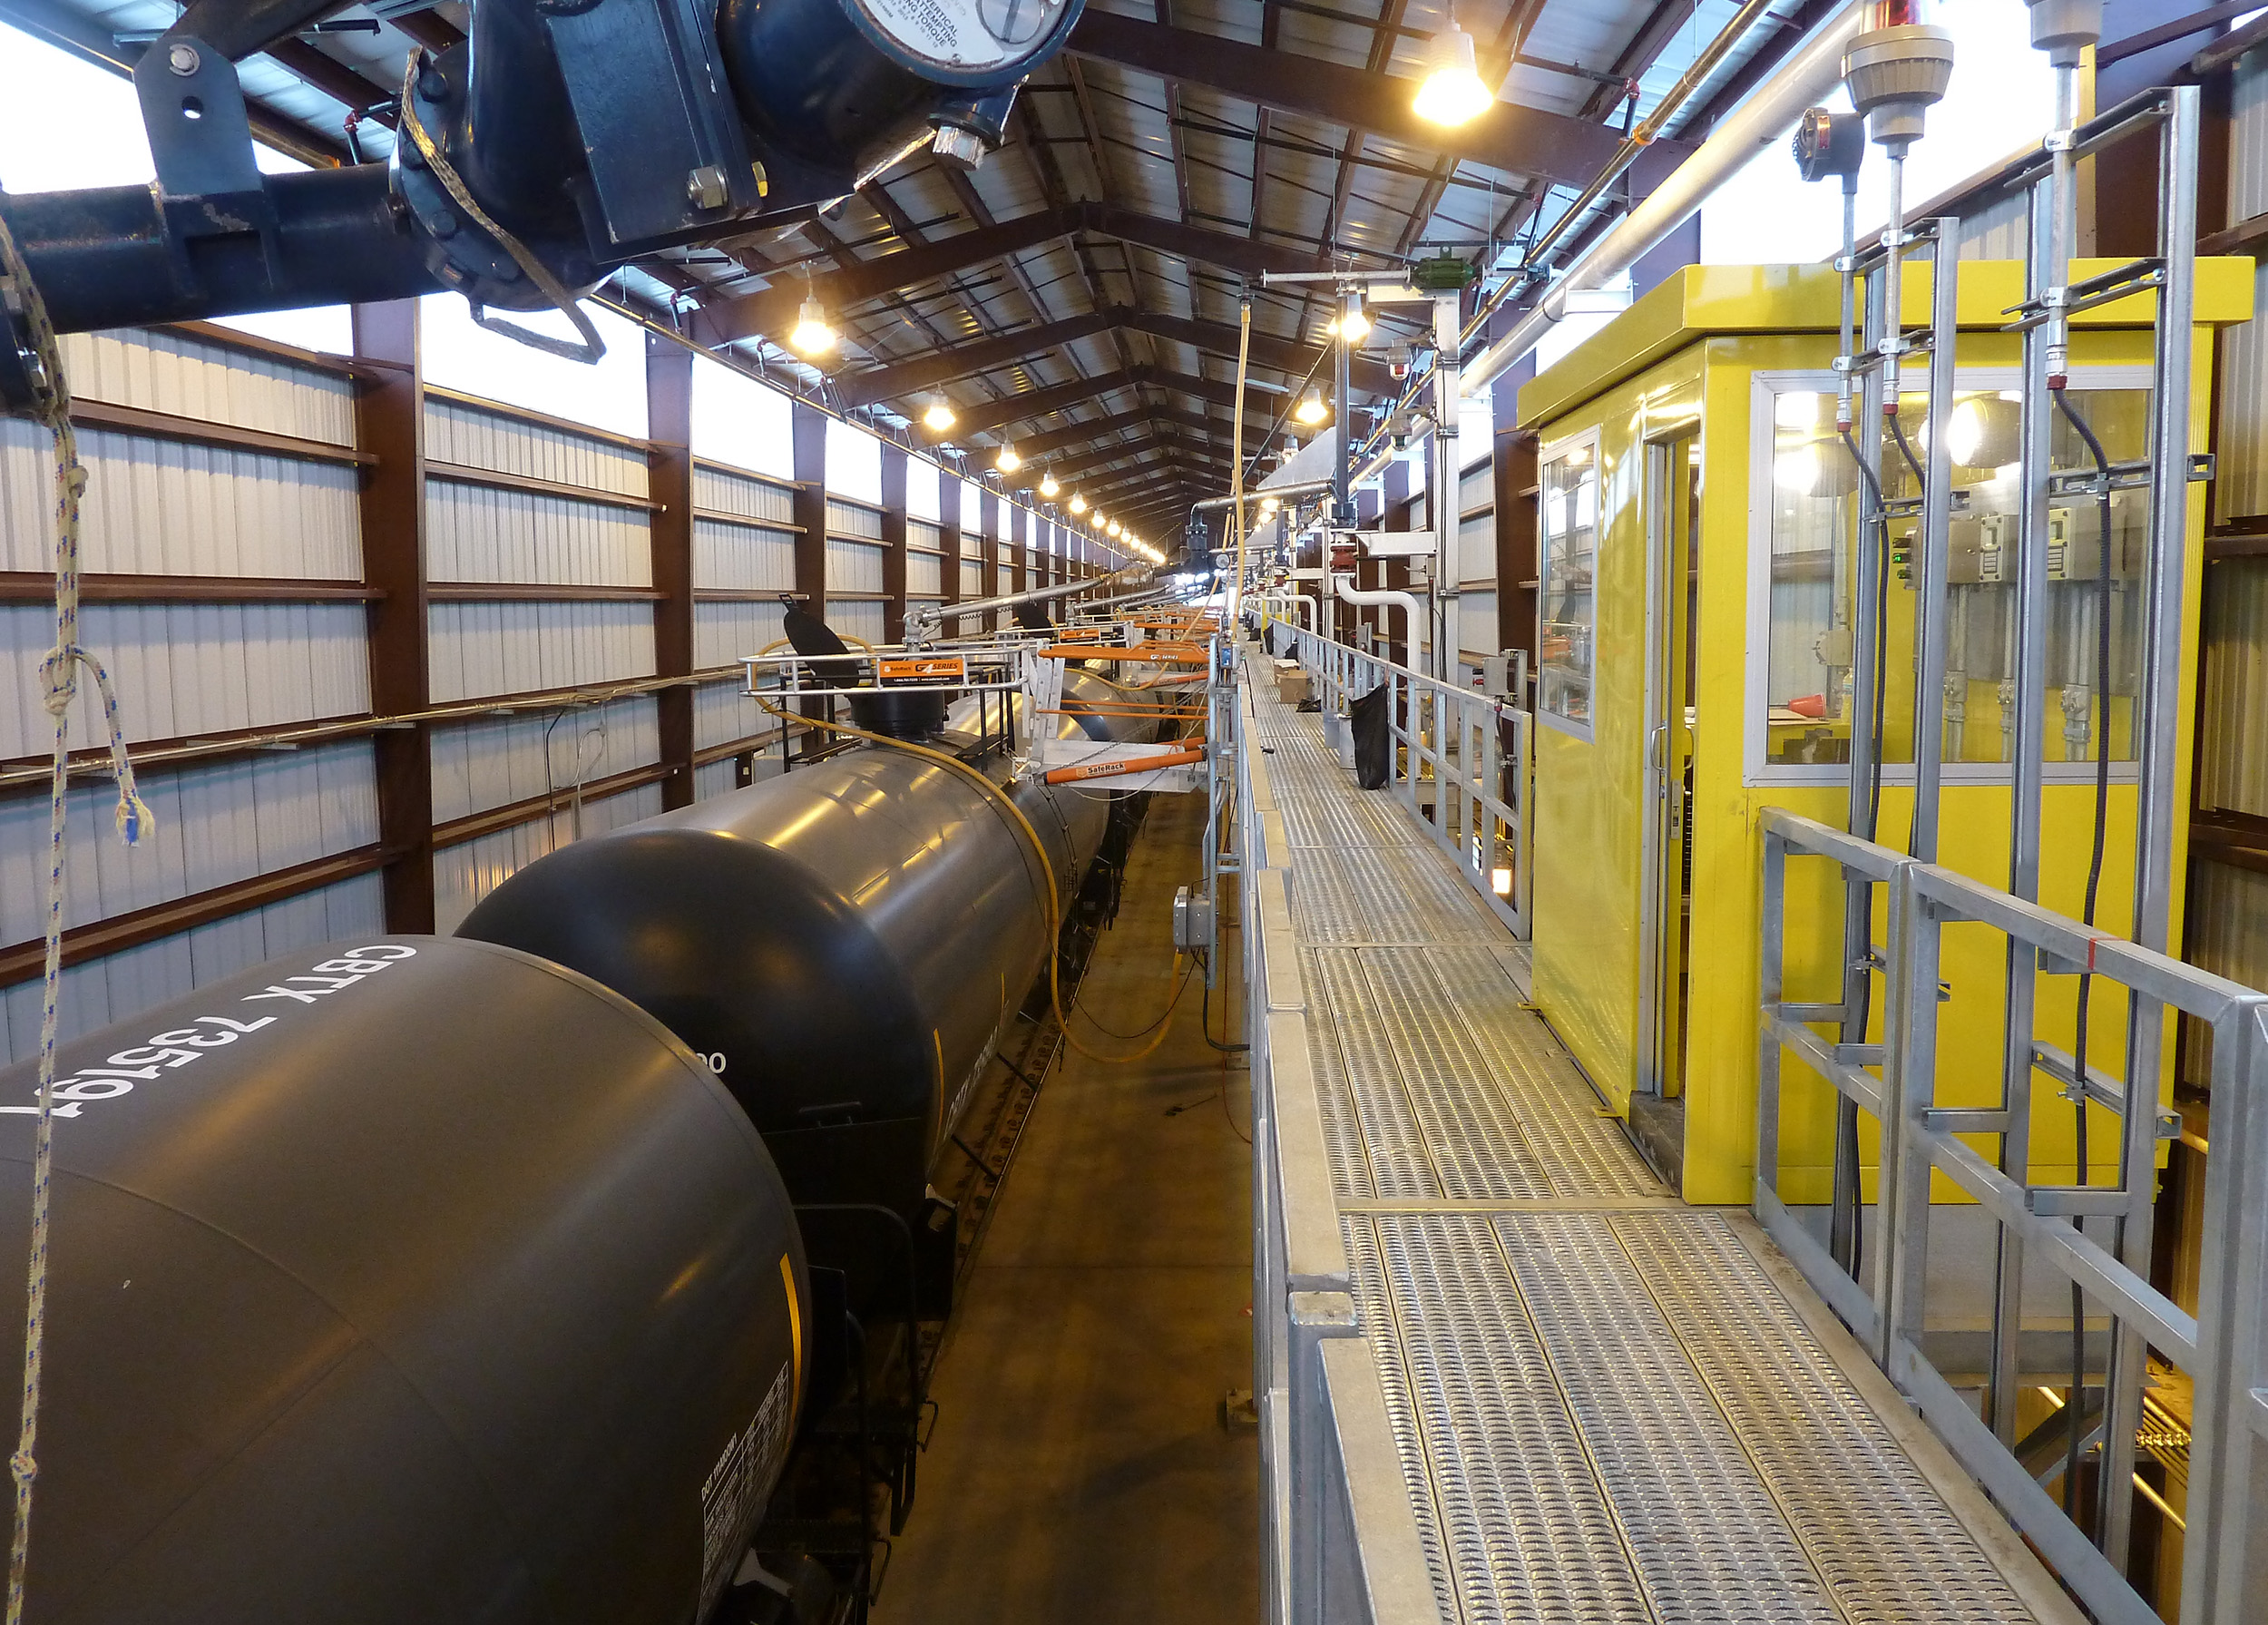 The facility is capable of loading two 100-car unit trains per 24-hour period.